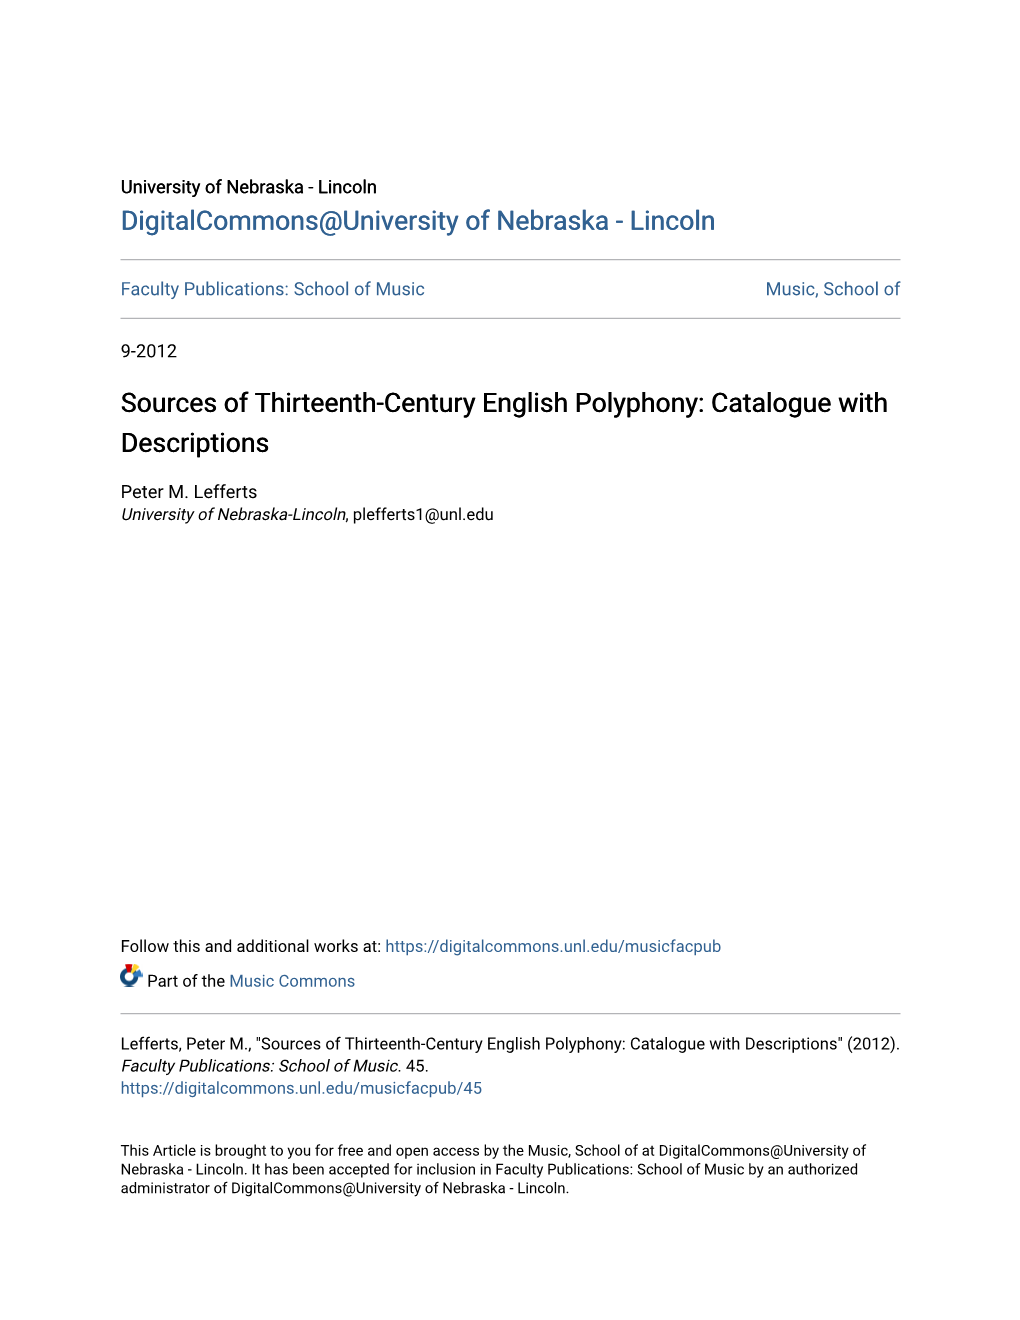 Sources of Thirteenth-Century English Polyphony: Catalogue with Descriptions